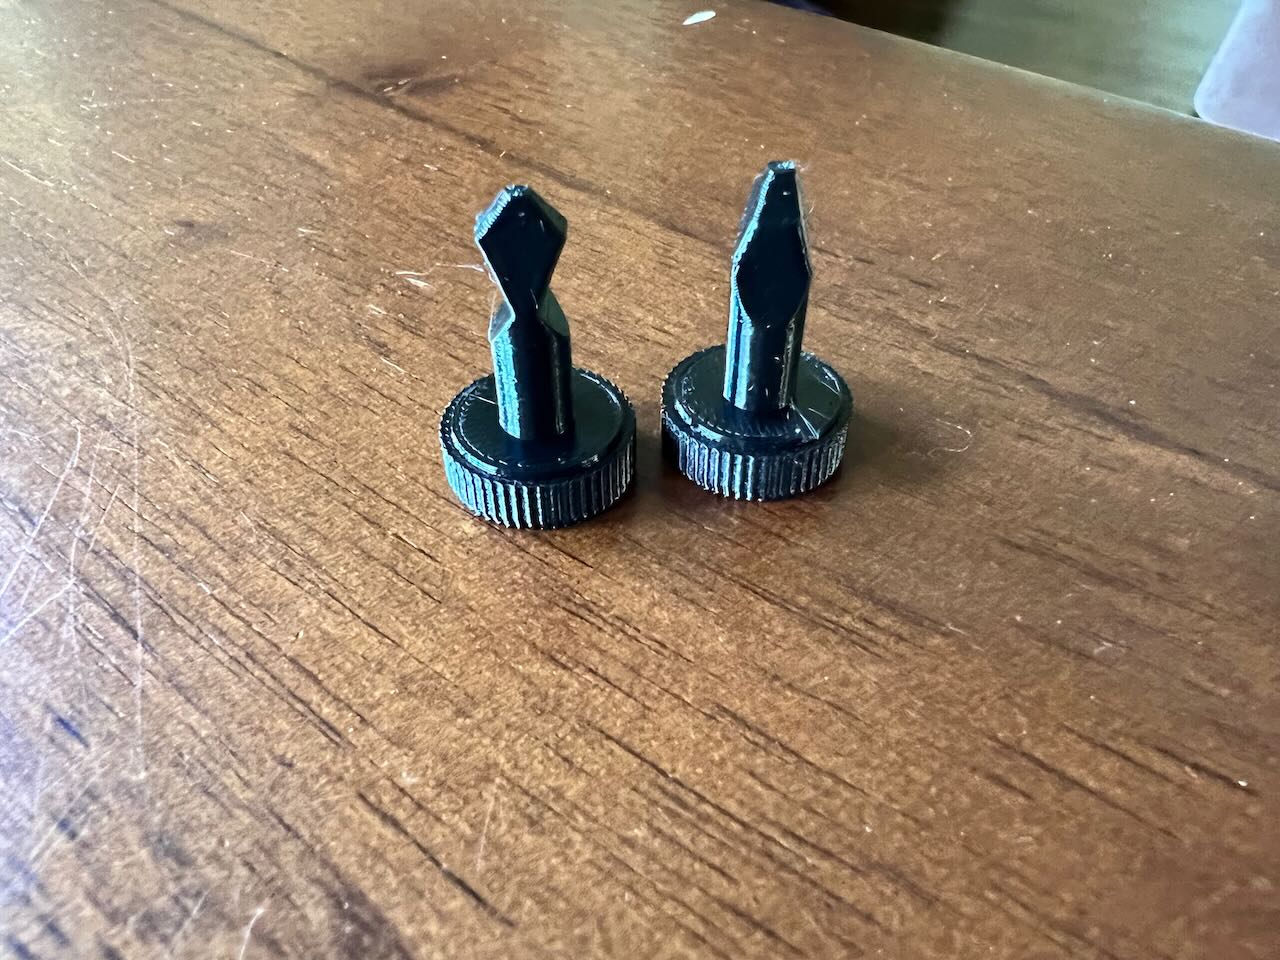 Tesla Tow Hitch Cover screws